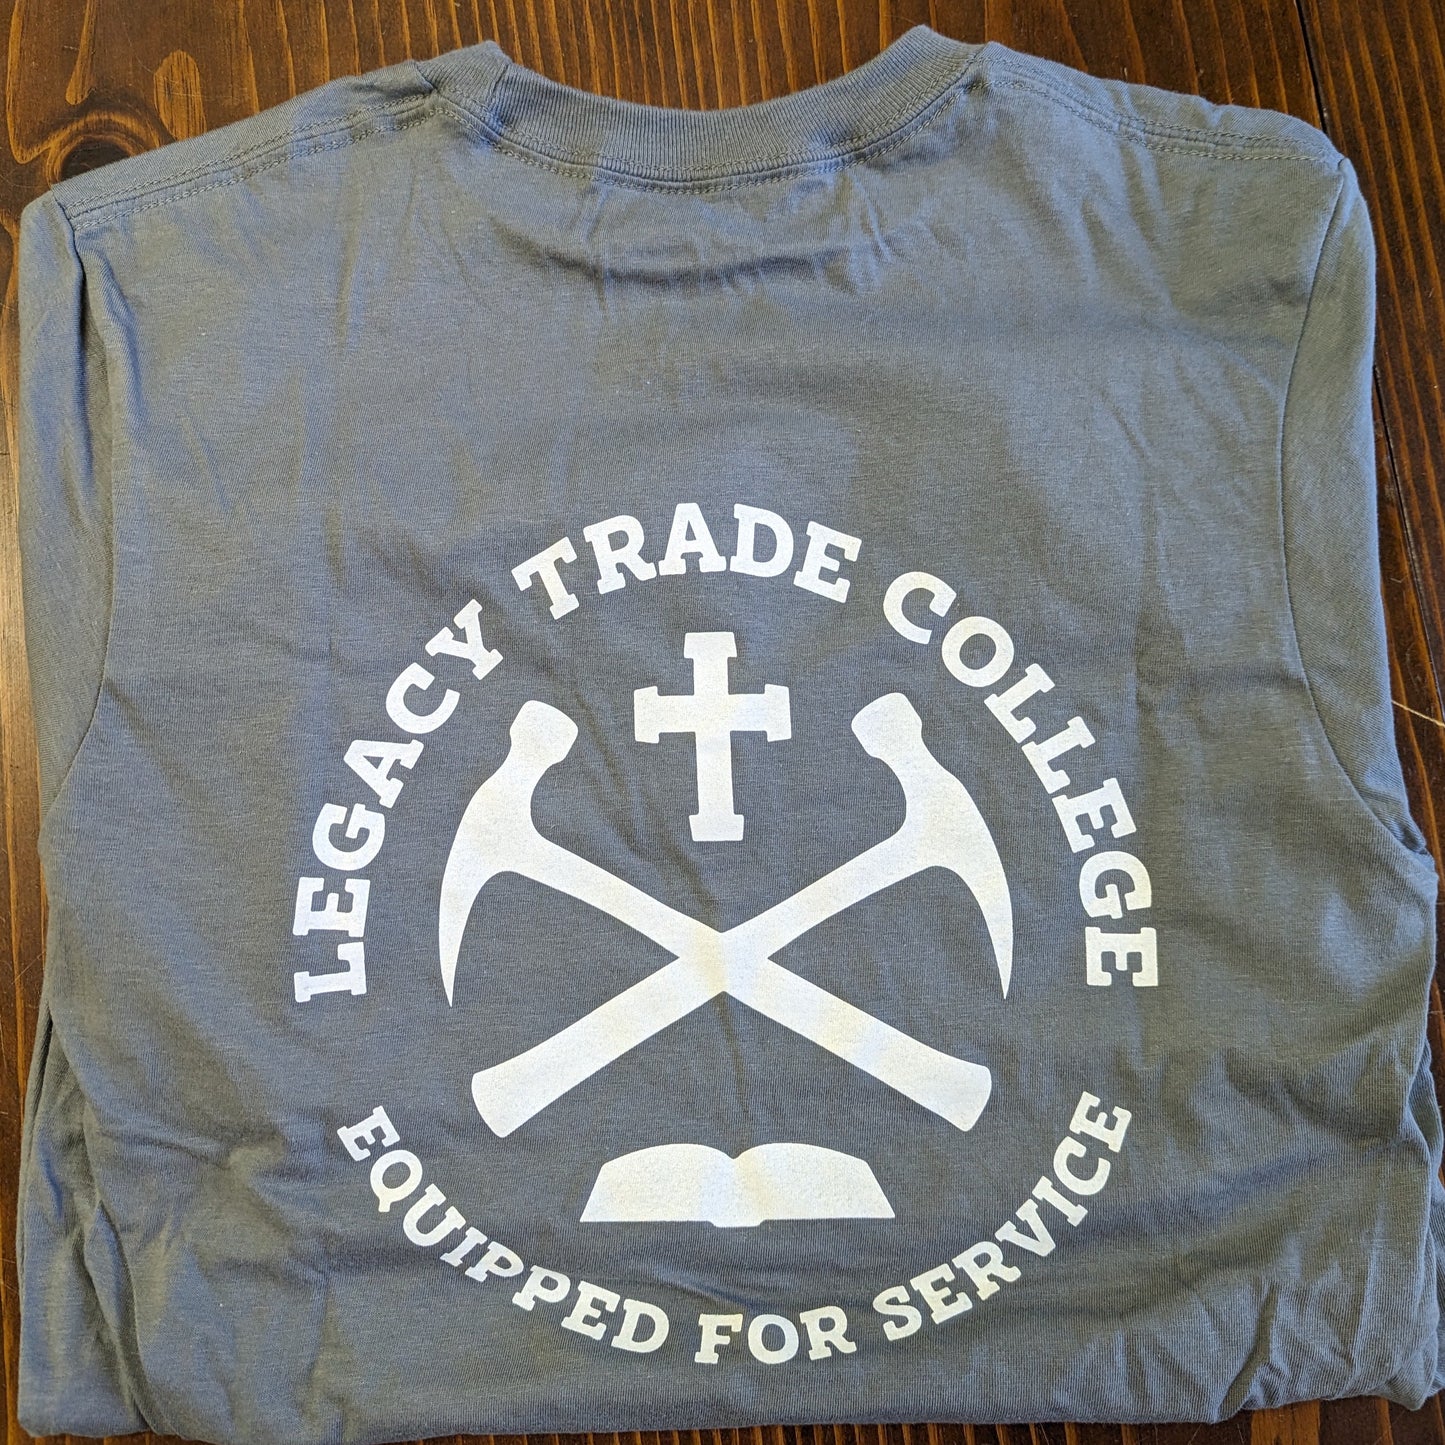 Legacy Trade College Seal with motto, "Equipped for Service" in white.